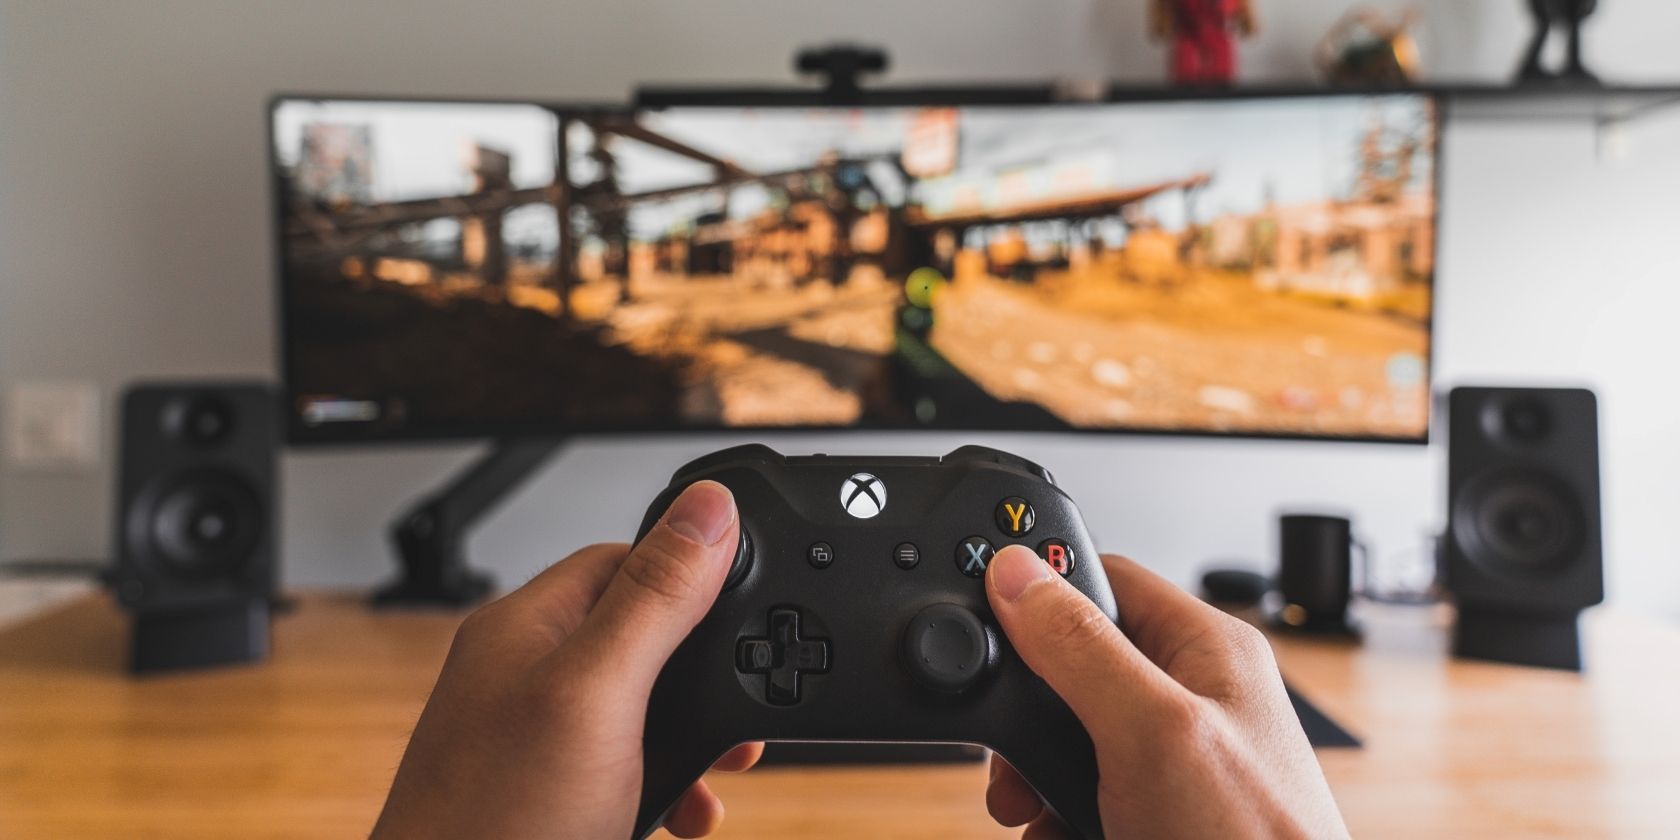 A photograph of an Xbox Wireless Controller in front of a gaming monitor